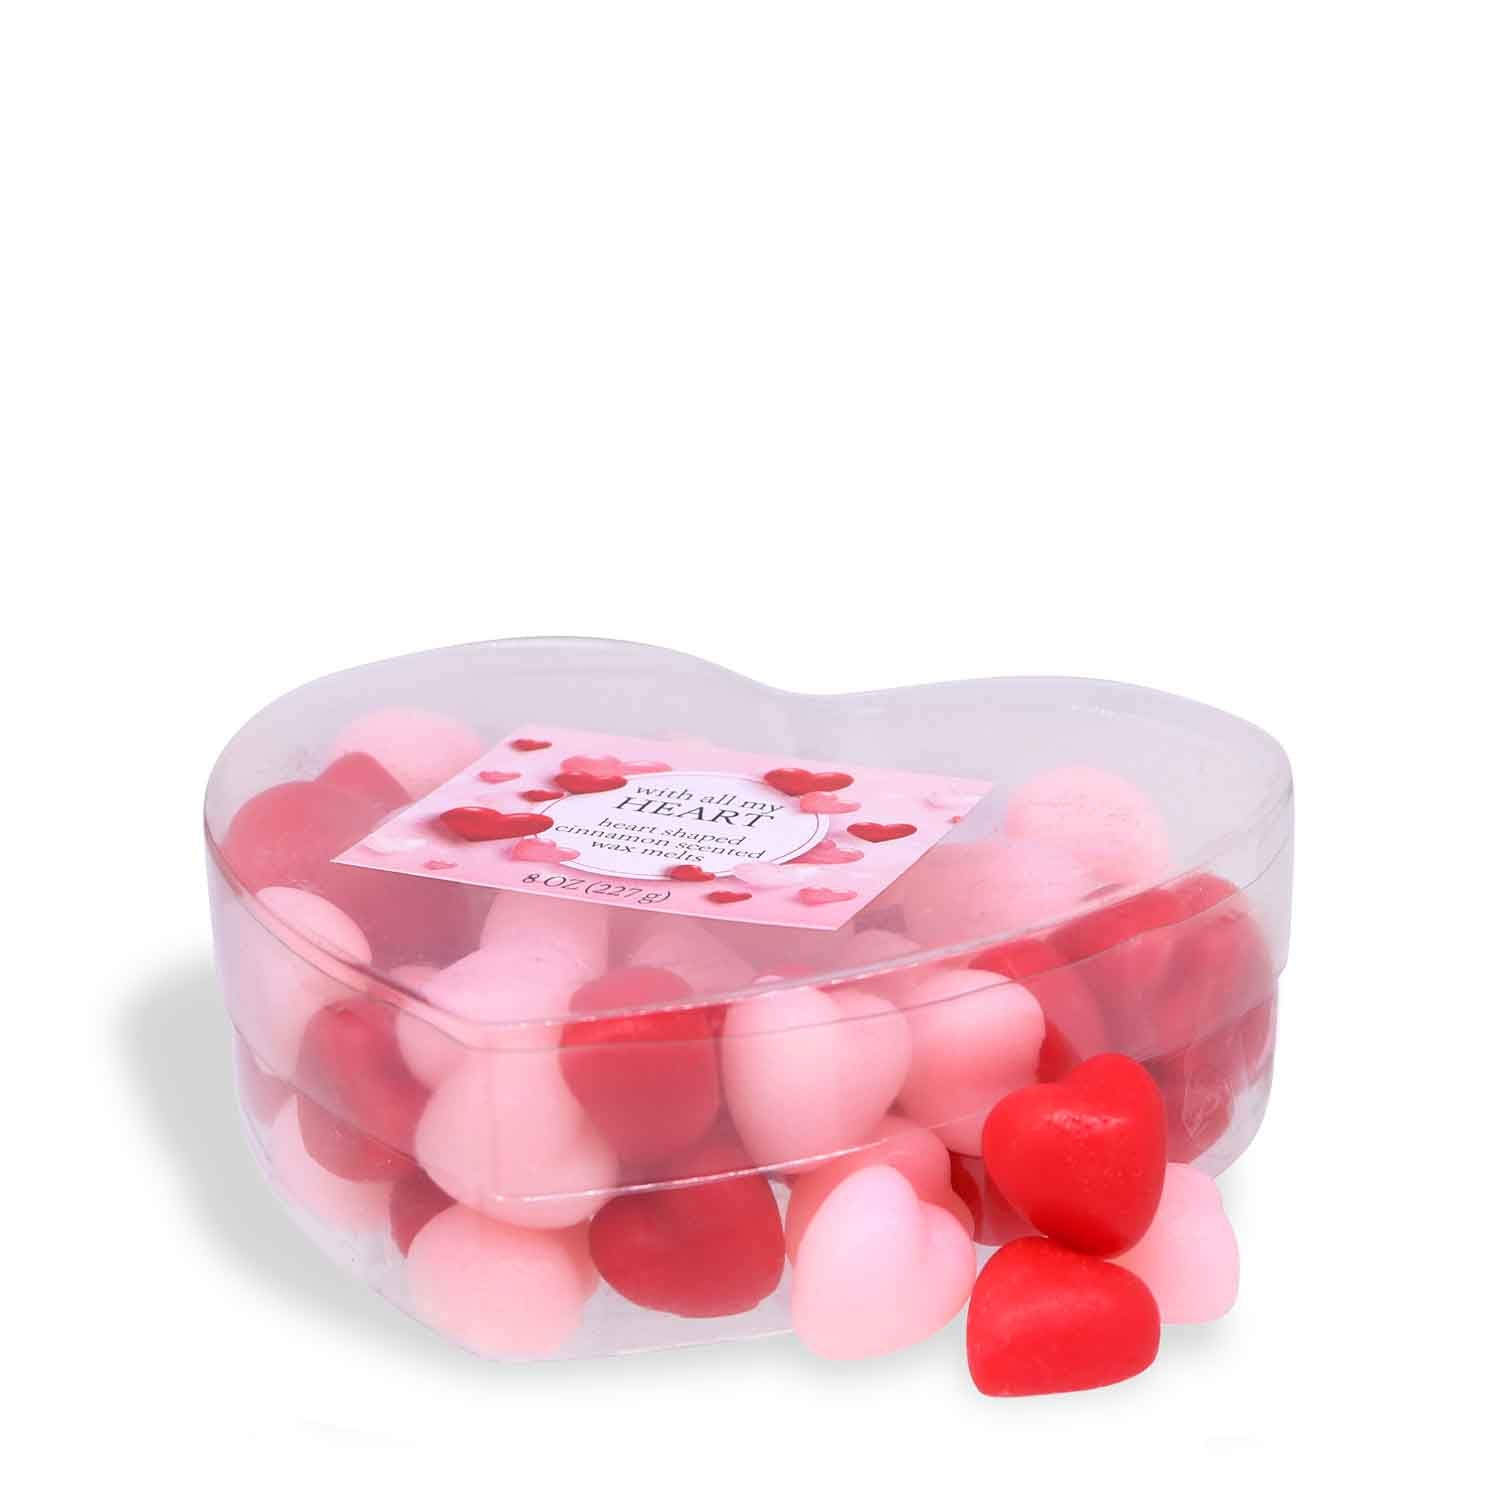 Tuscany Candle® SEASONAL's With All My Heart Scented Heart Shaped Wax Melts (8 oz) in a clear container scented with fragrance.